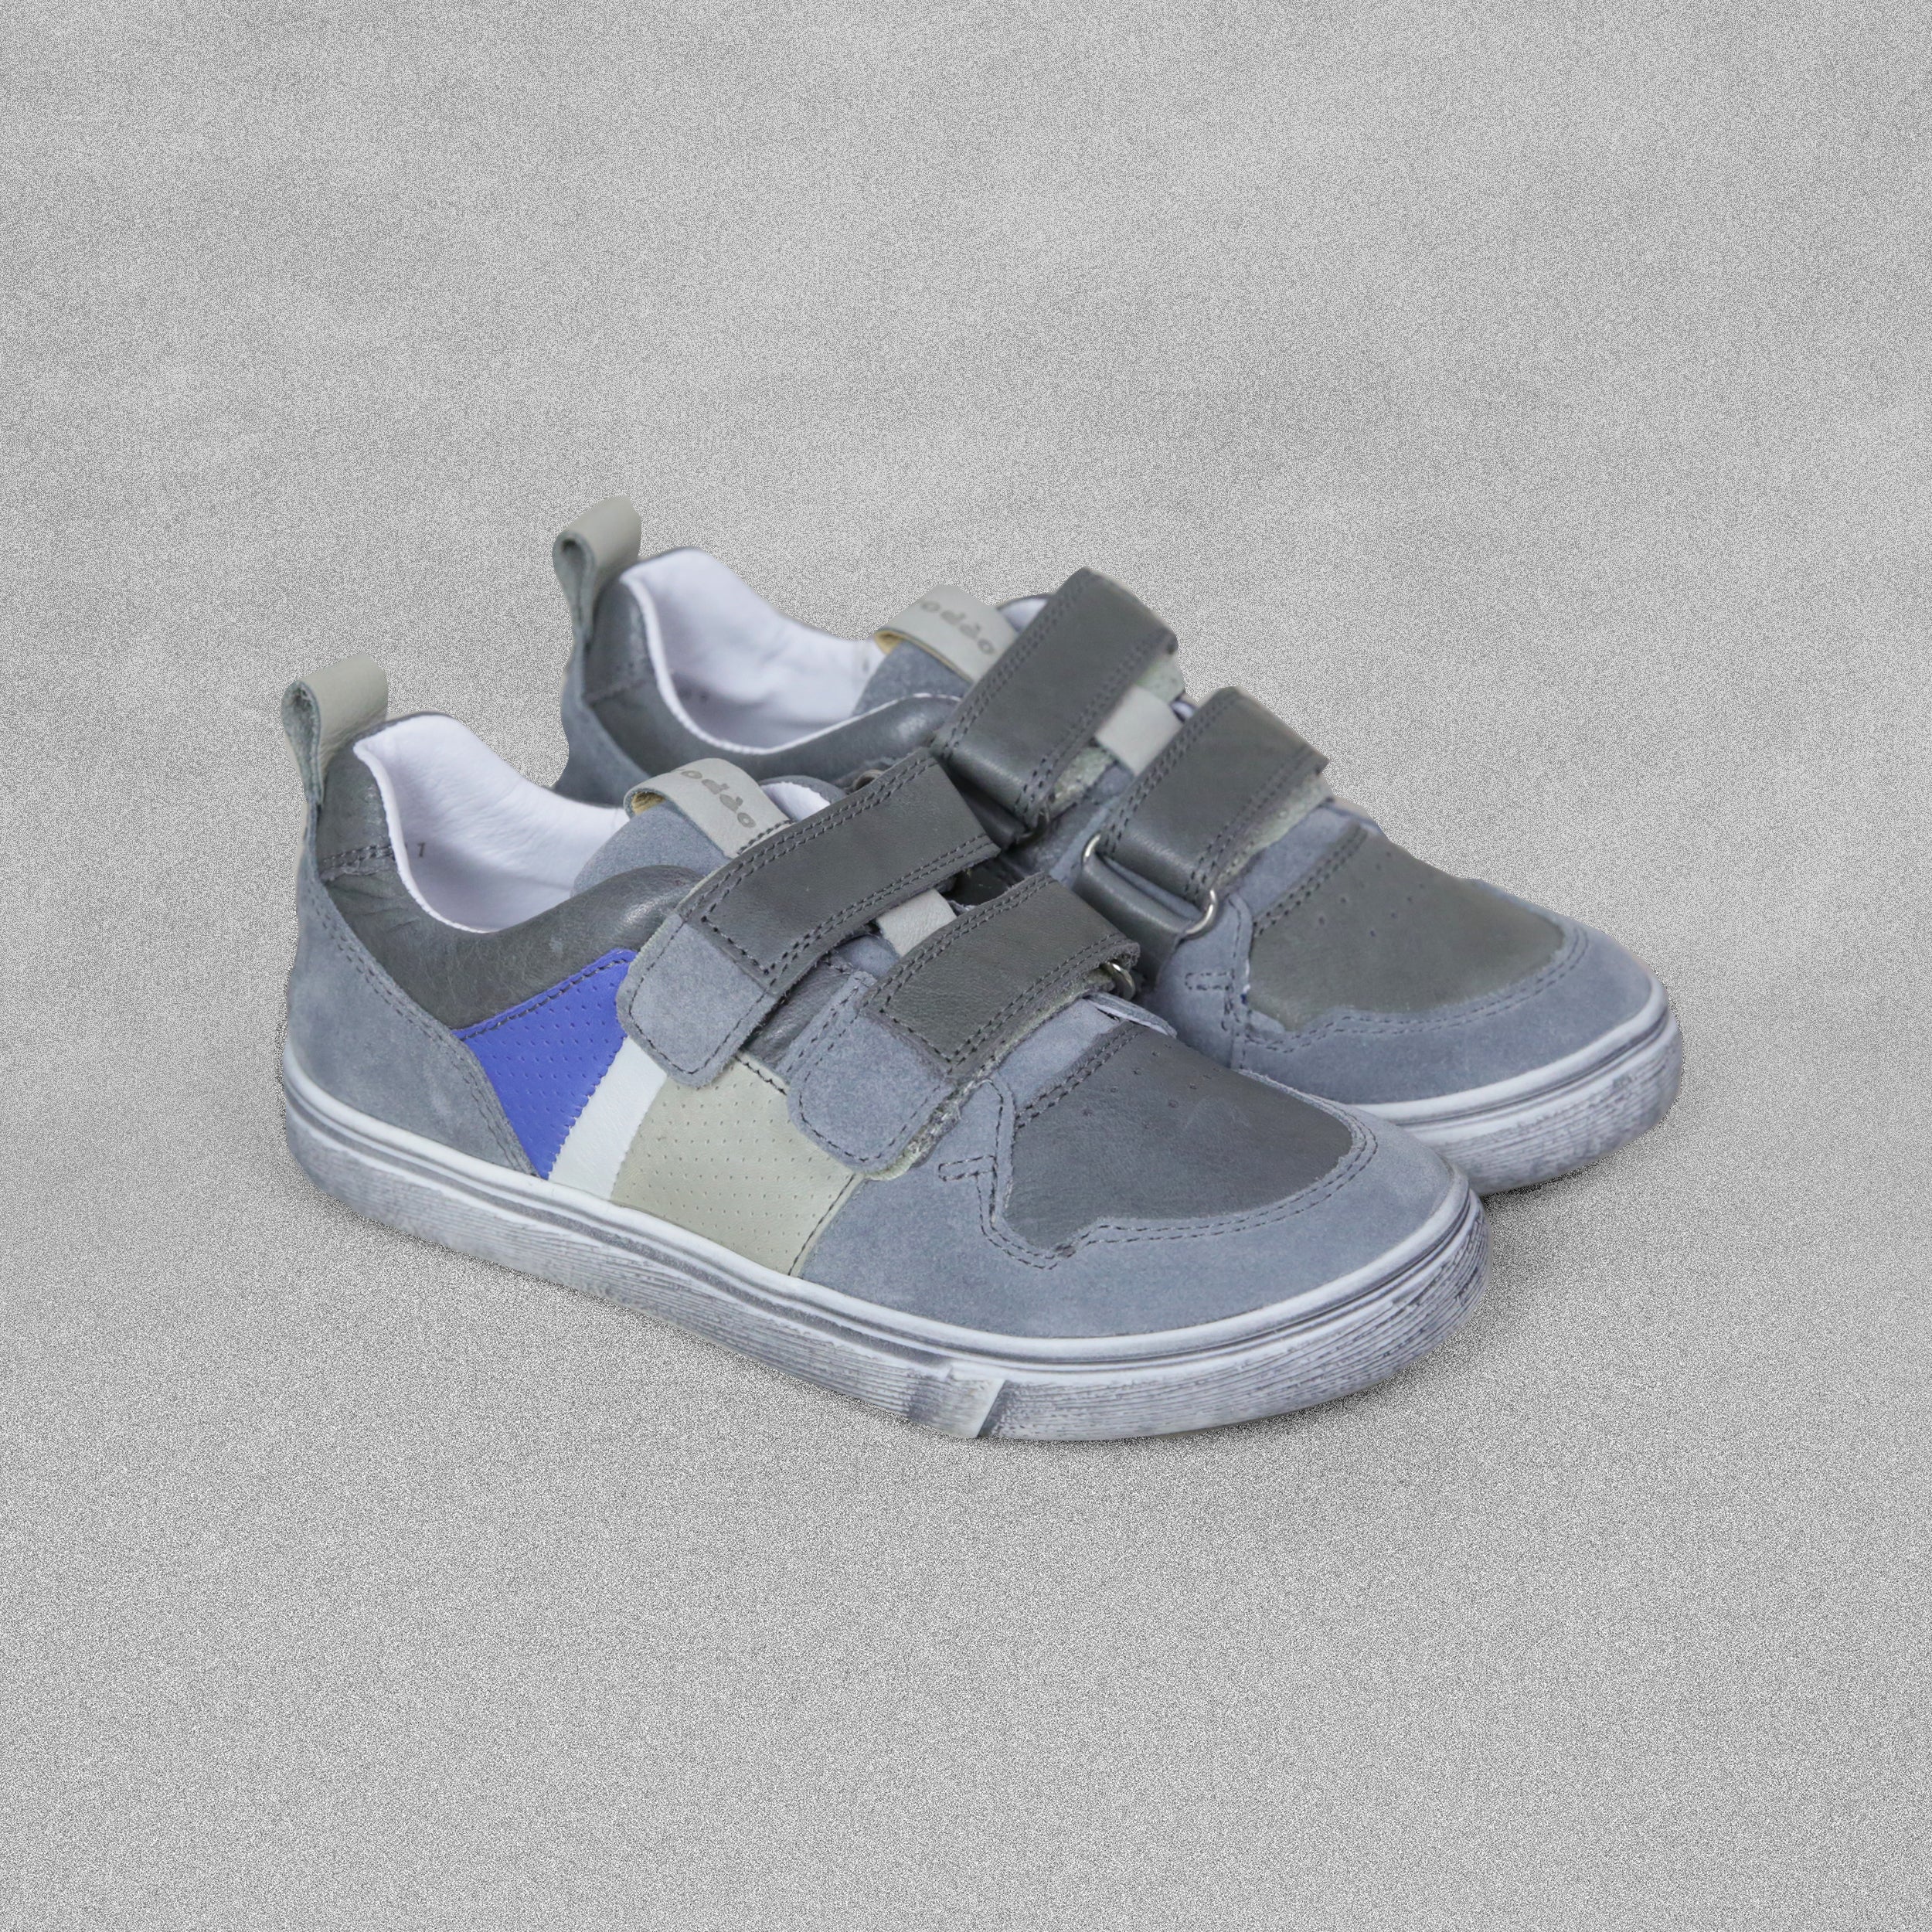 'Froddo' Grey Leather Shoes with Velcro Straps